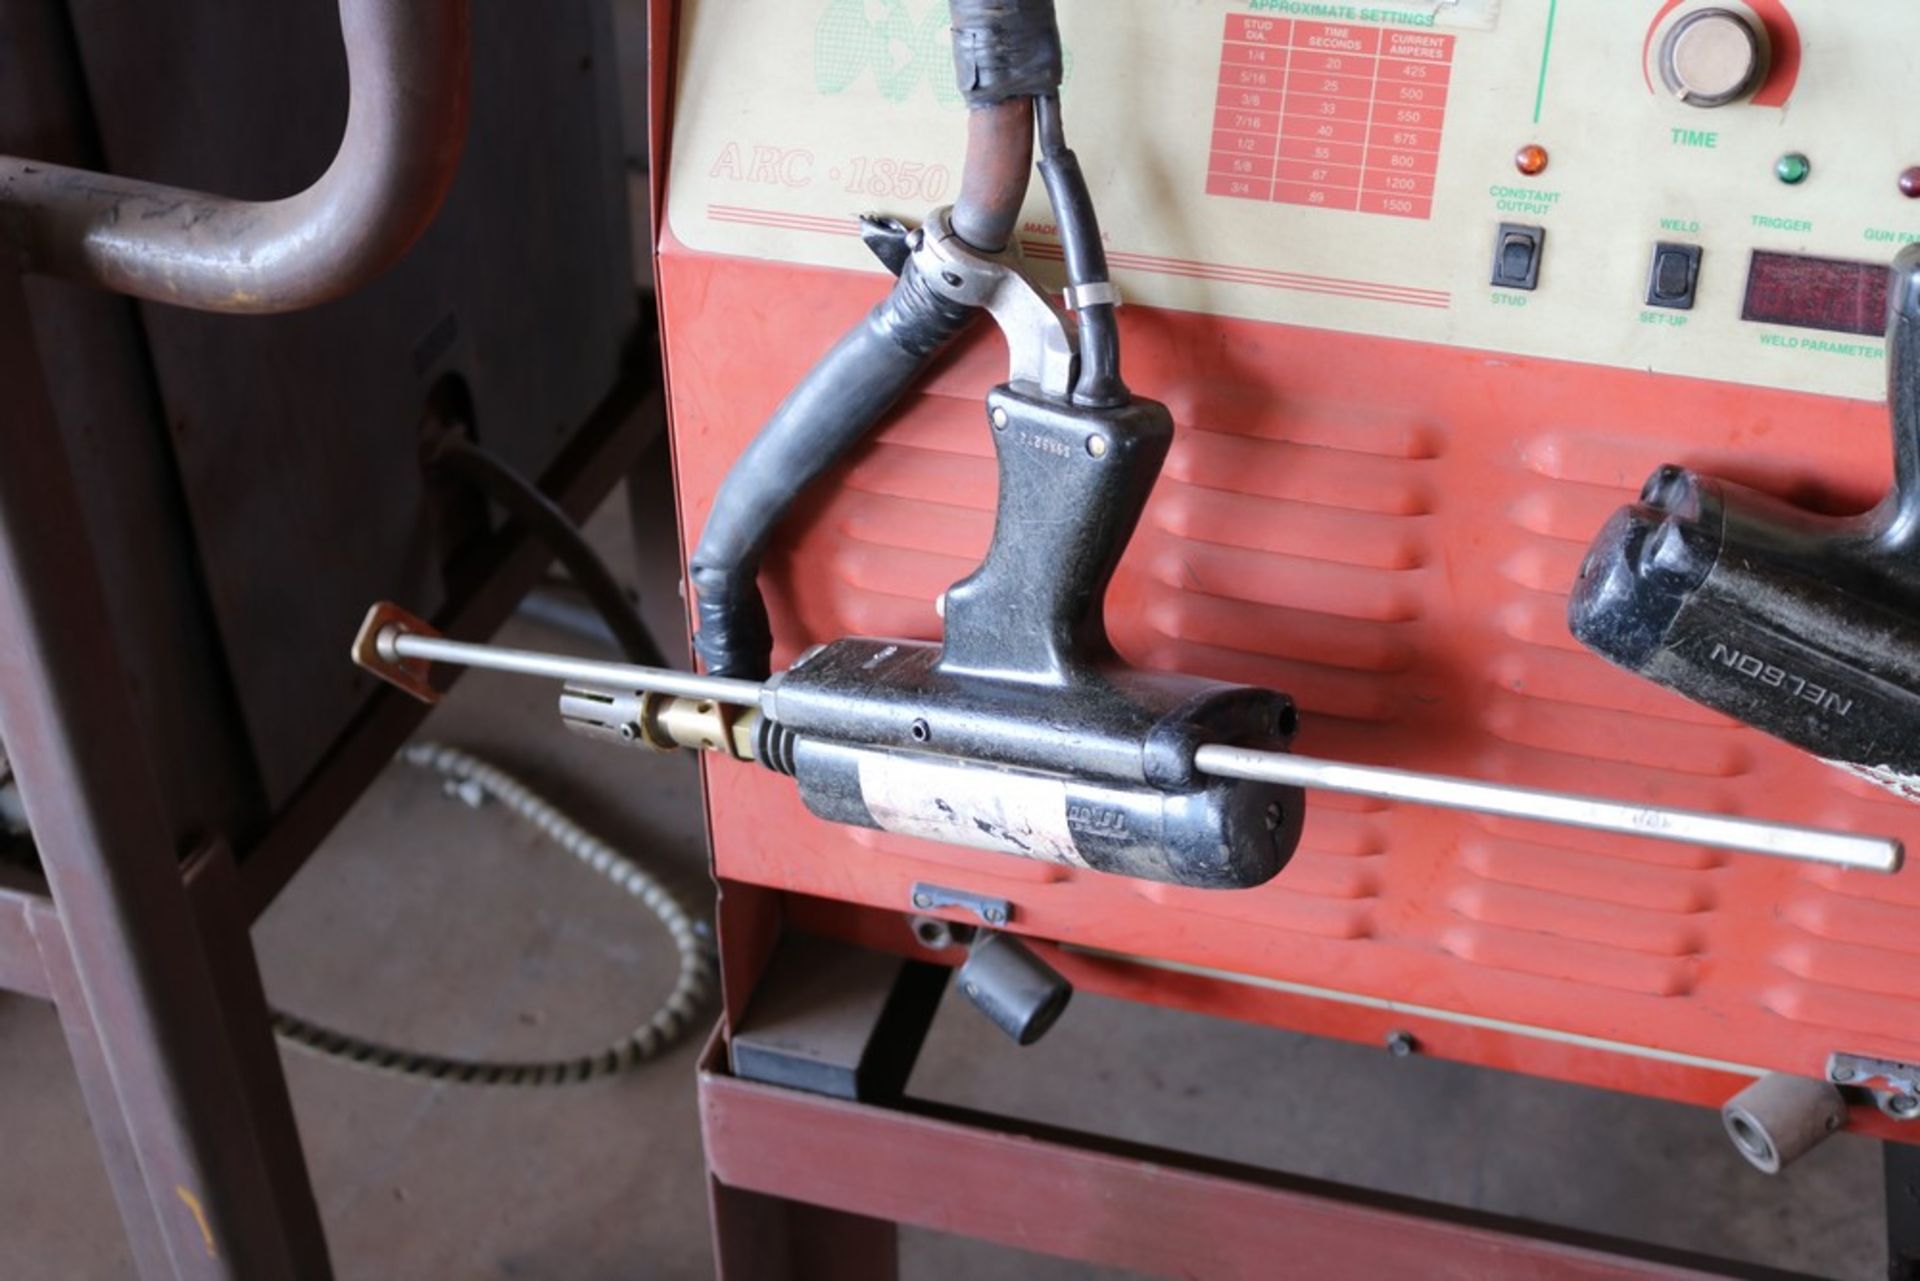 Proweld Arc1850 stud welder, 2 guns w/ leads, including collets and standoffs - Image 11 of 11